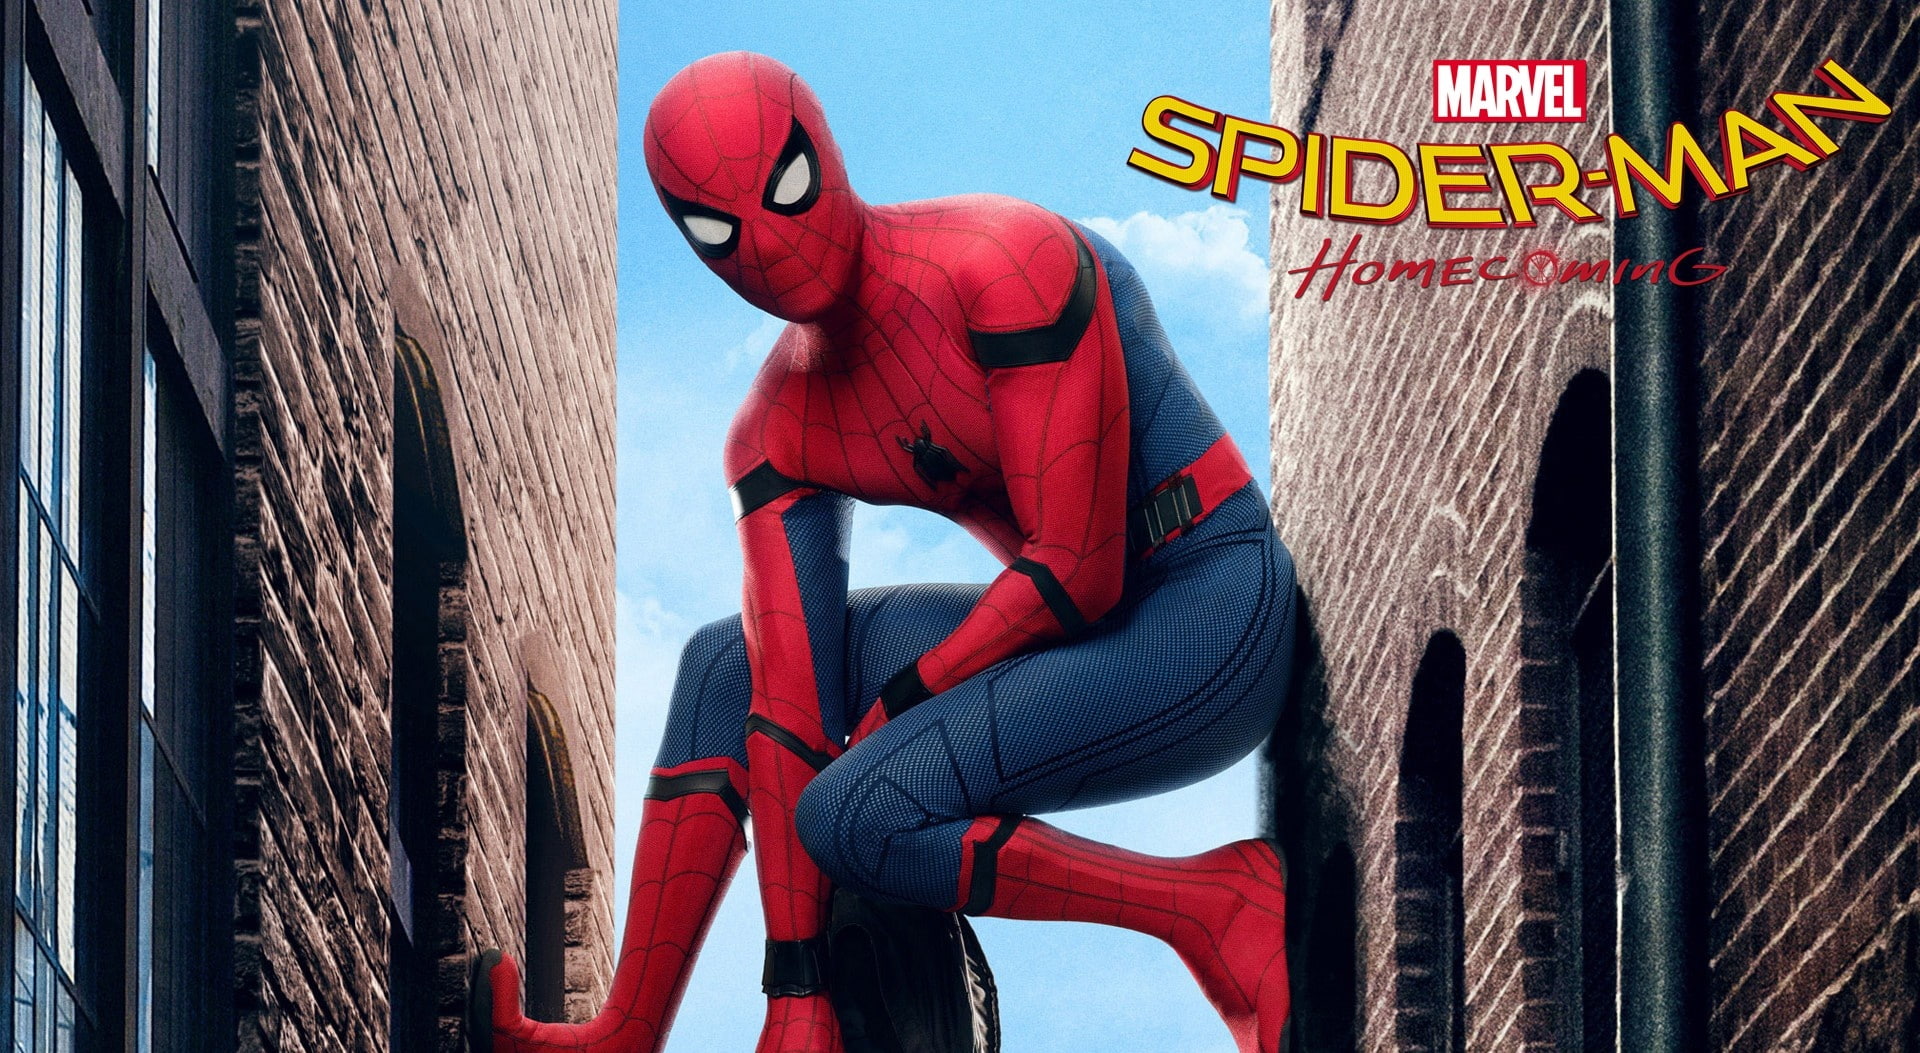 Spider-Man Homecoming, Movies, Spiderman, Film, 2017, day, red